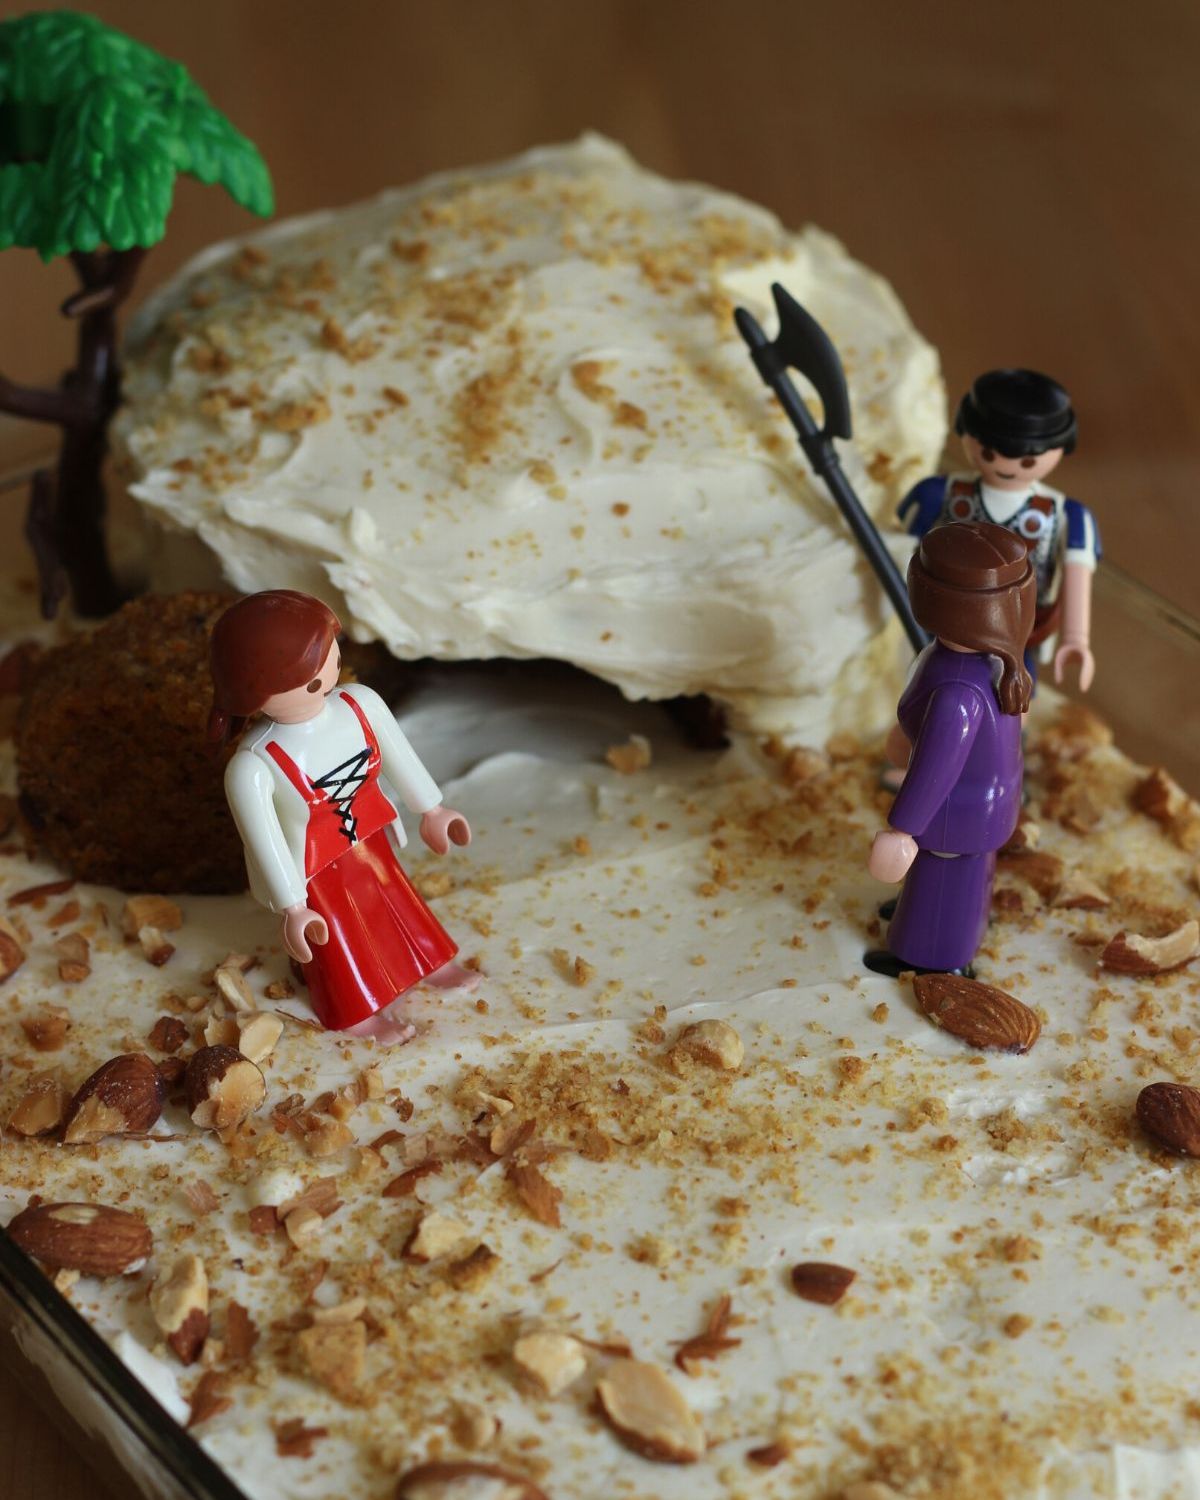 empty tomb cake with playmobil figures on the top.